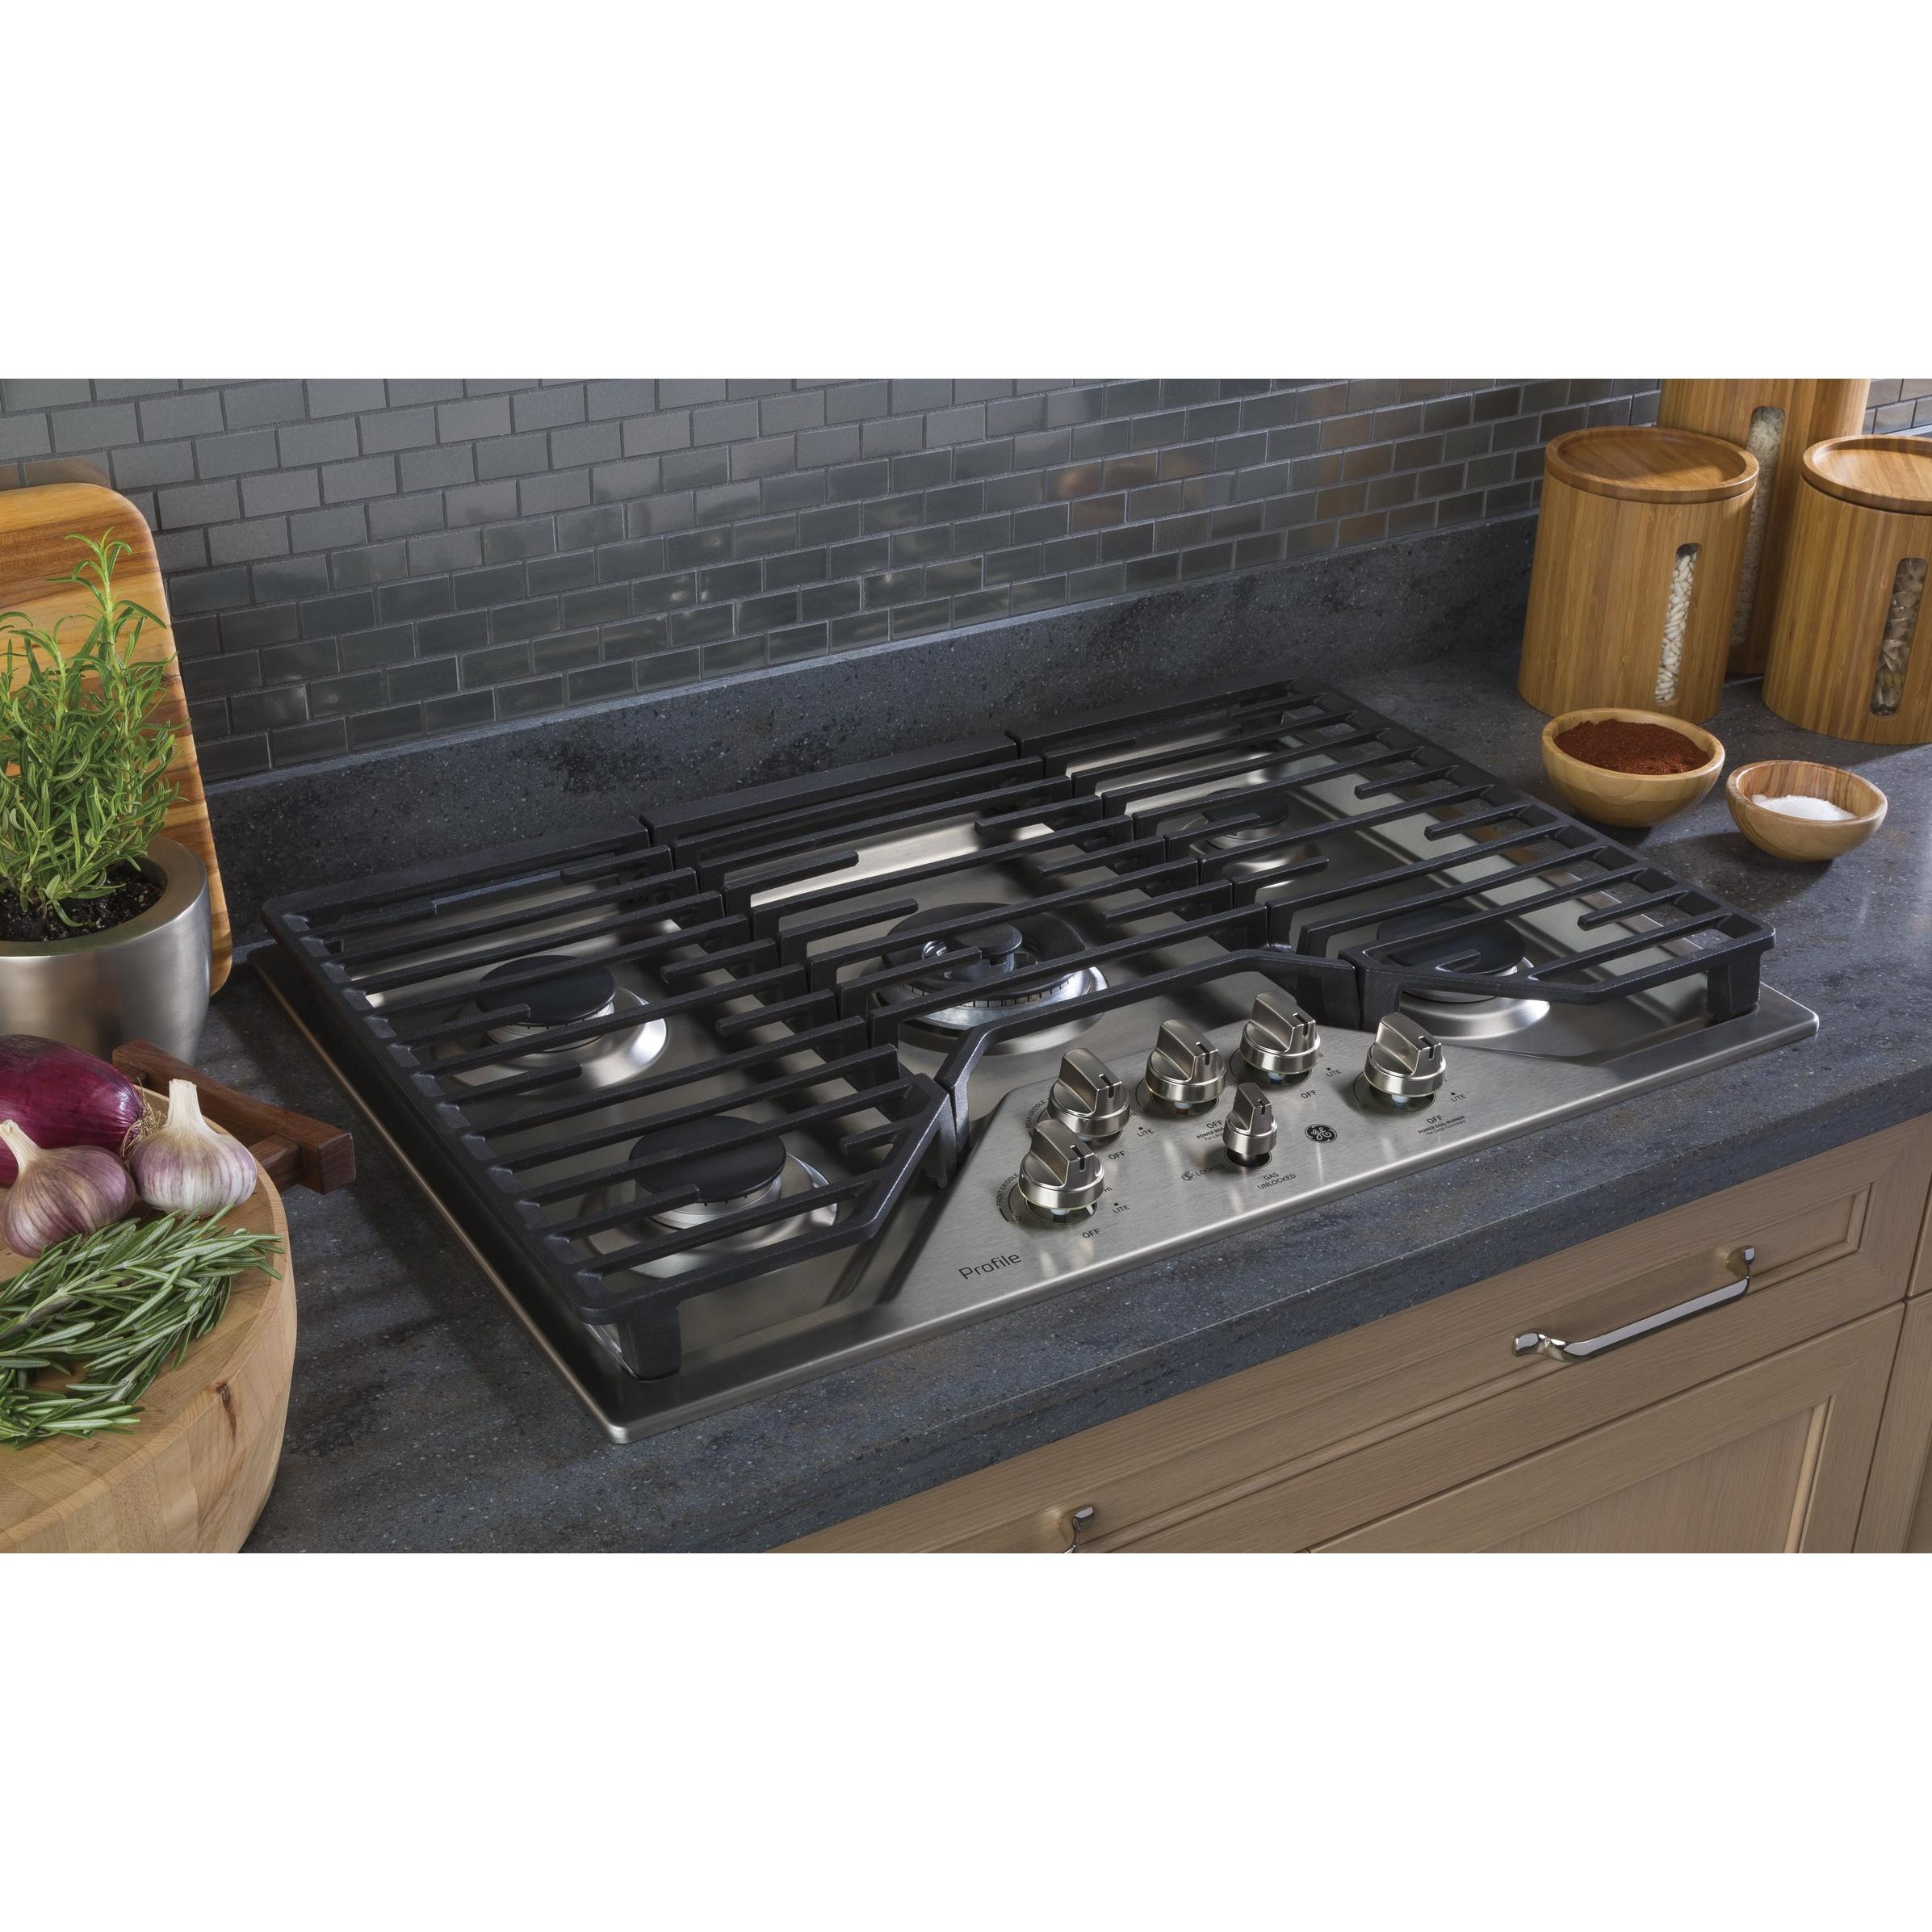 GE Profile 30-inch Built-In Gas Cooktop PGP9030SLSS